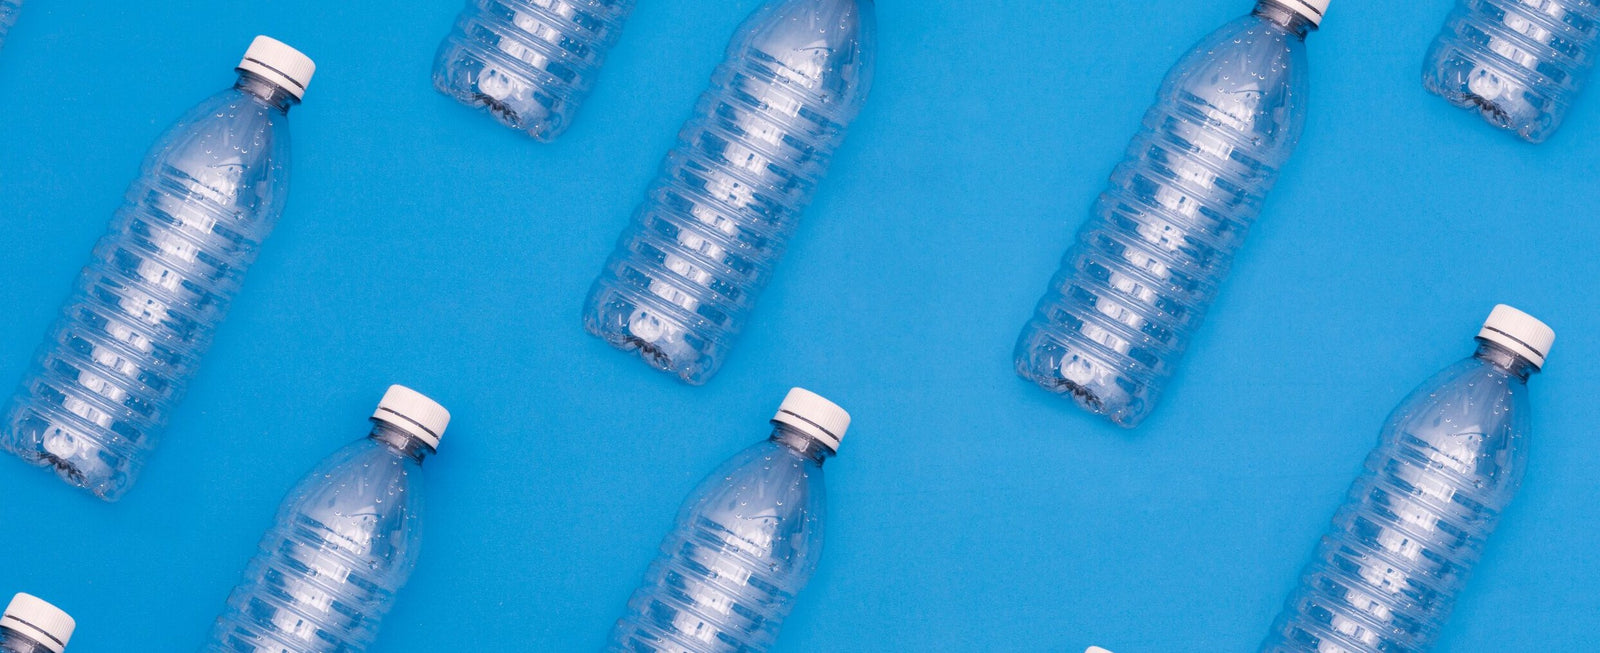 Single-Use Plastic Water Bottles - a Bad Choice By Every Measure